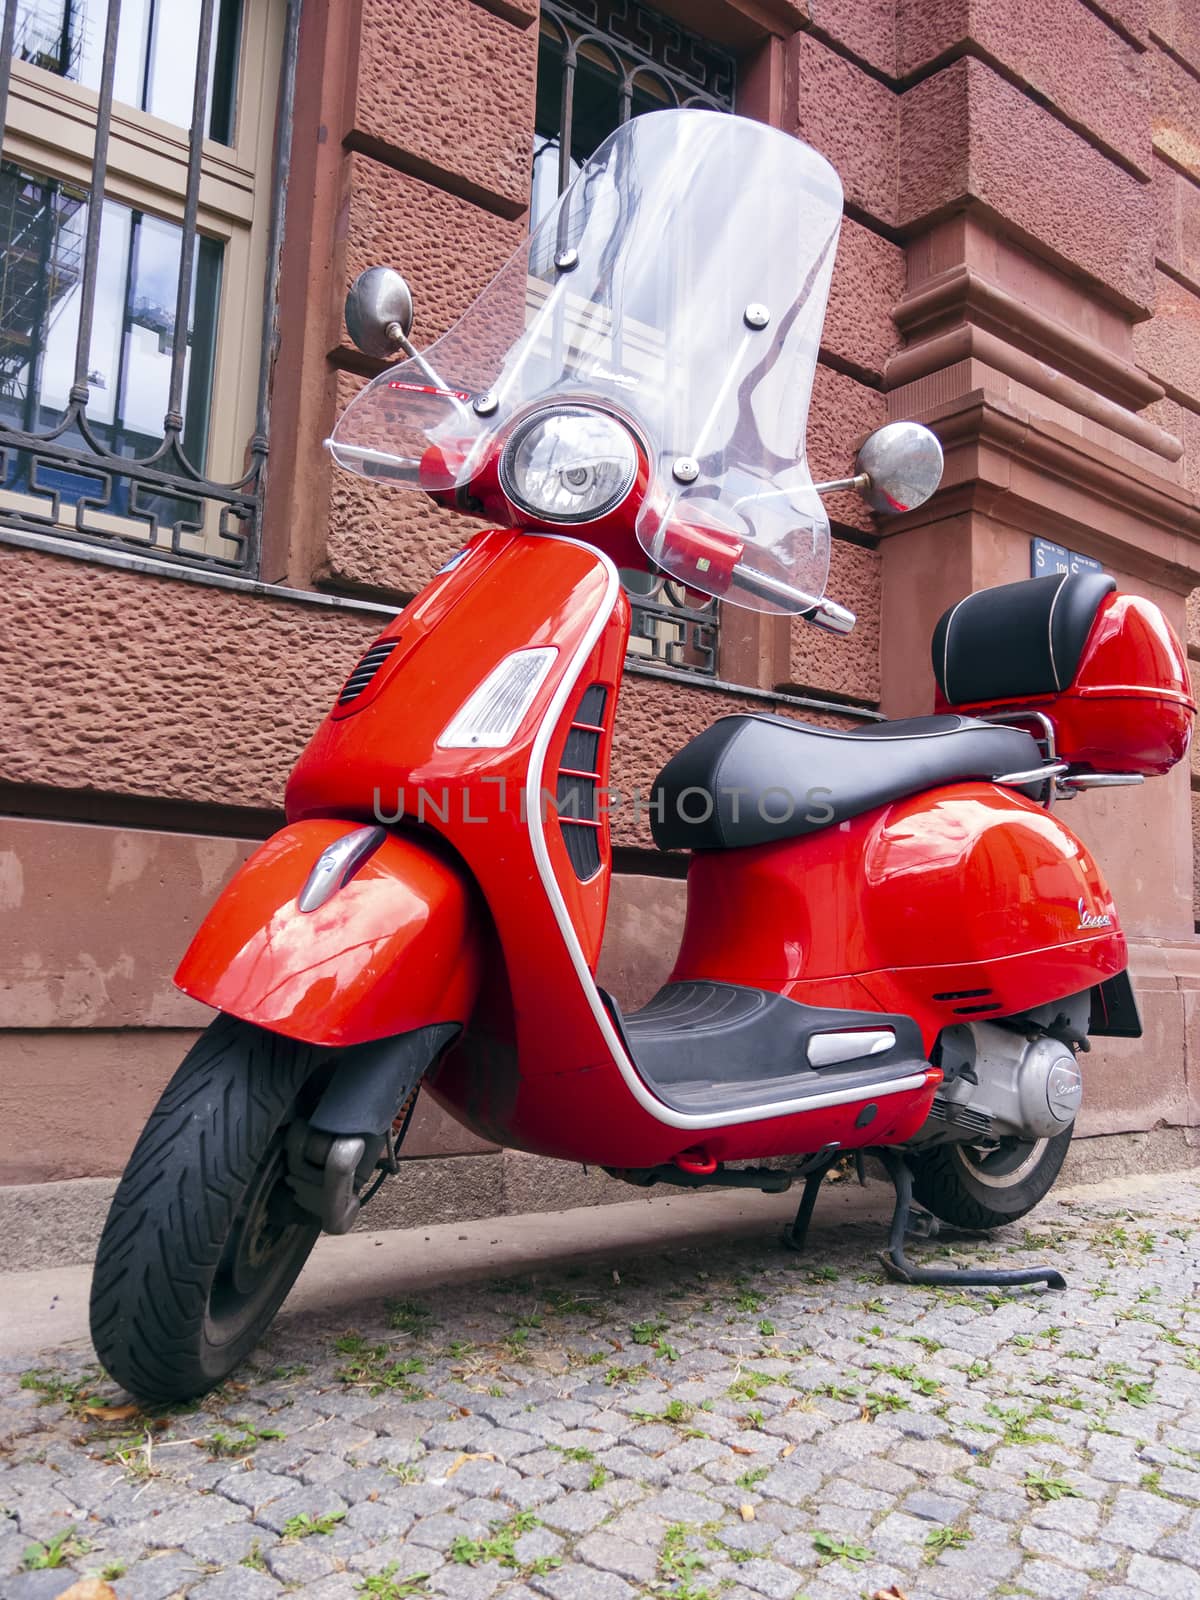 Berlin, Germany - August 13, 2019: A red Vespa stands on the edge of the road in Berlin